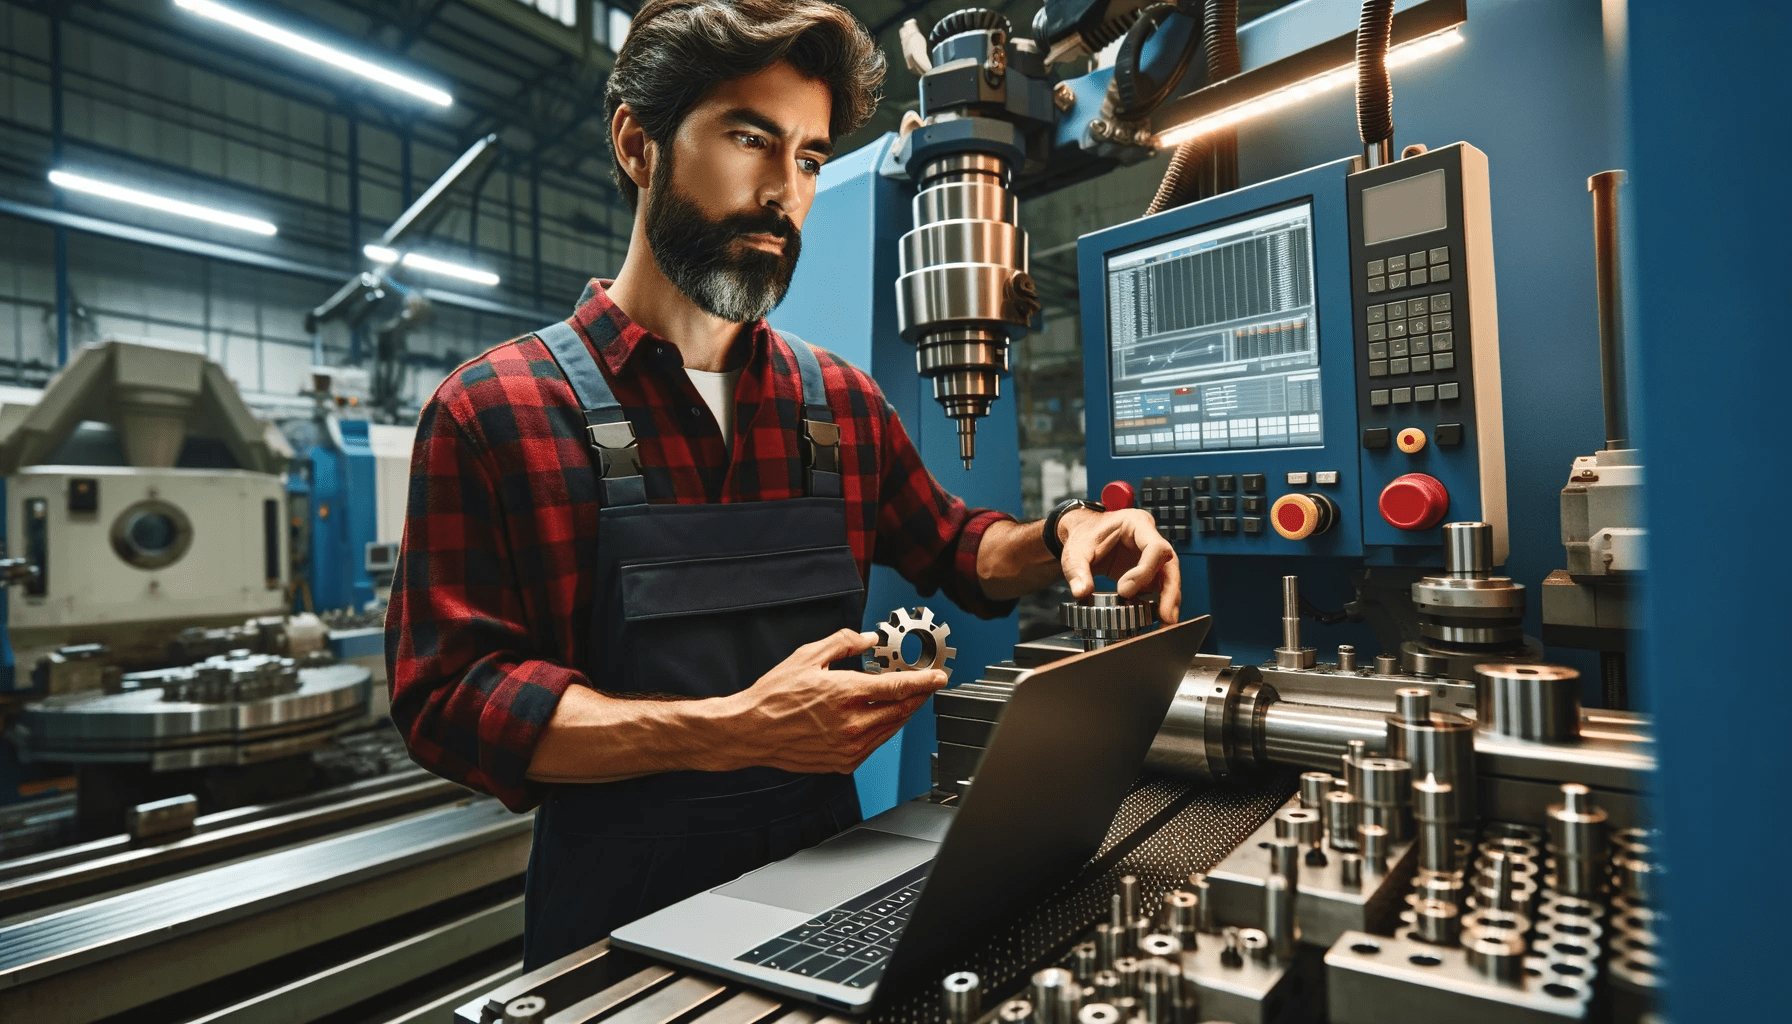 Hispanic male CNC machinist in his forties, with a thick beard and wearing a red flannel shirt. He's inspecting a precision component in a